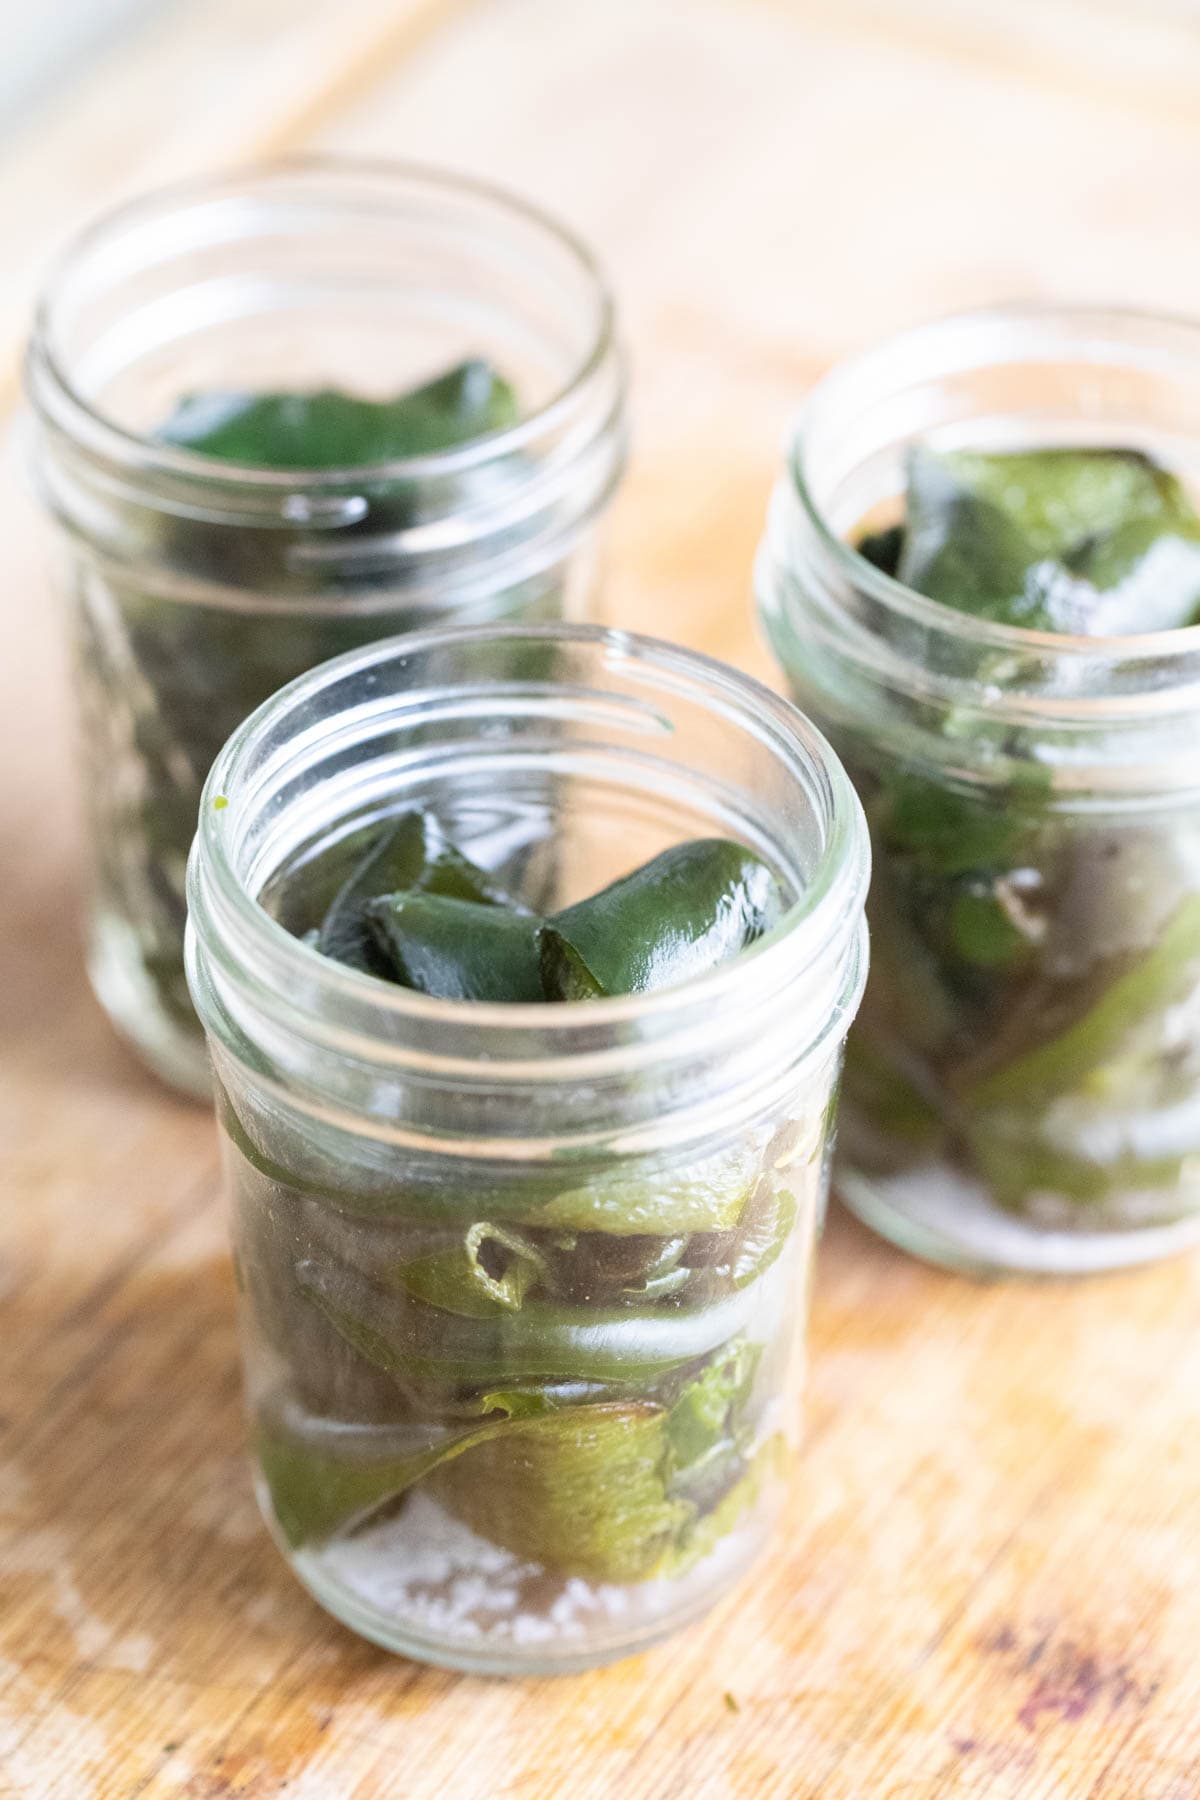 Packing the jars with roasted poblano peppers. 